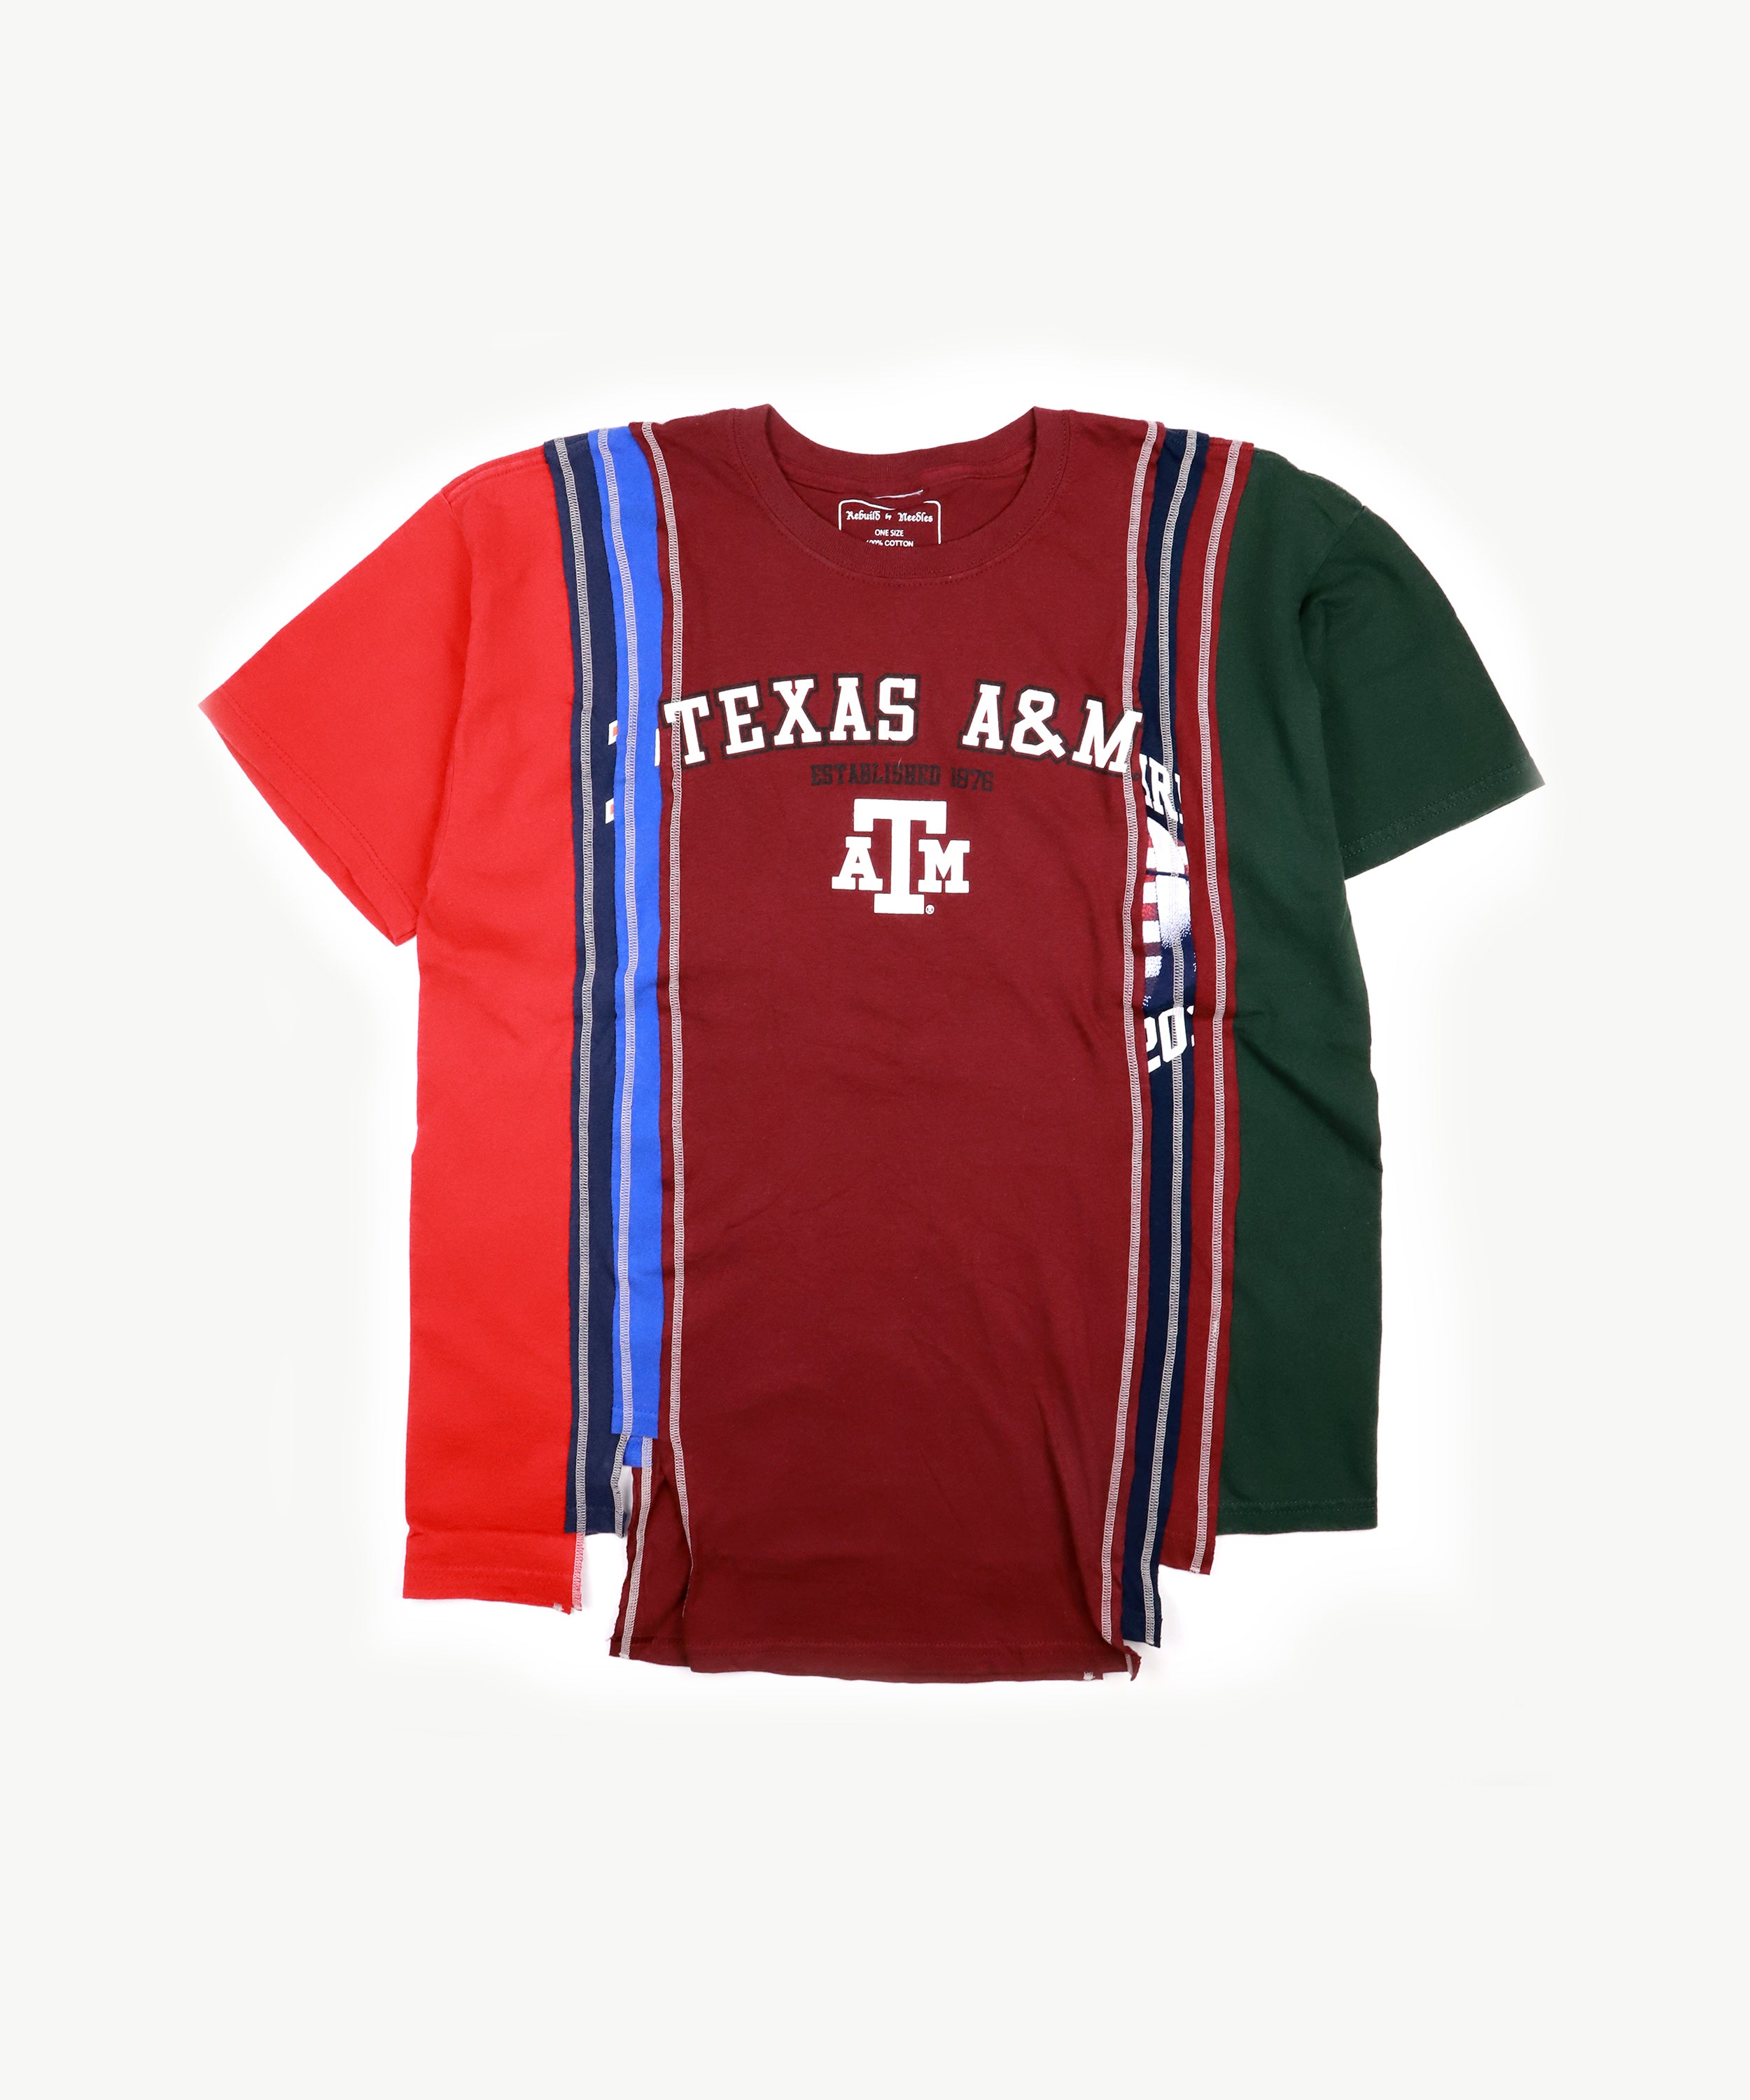 Rebuild by Needles 7 Cuts Short Sleeve Wide Tee - College